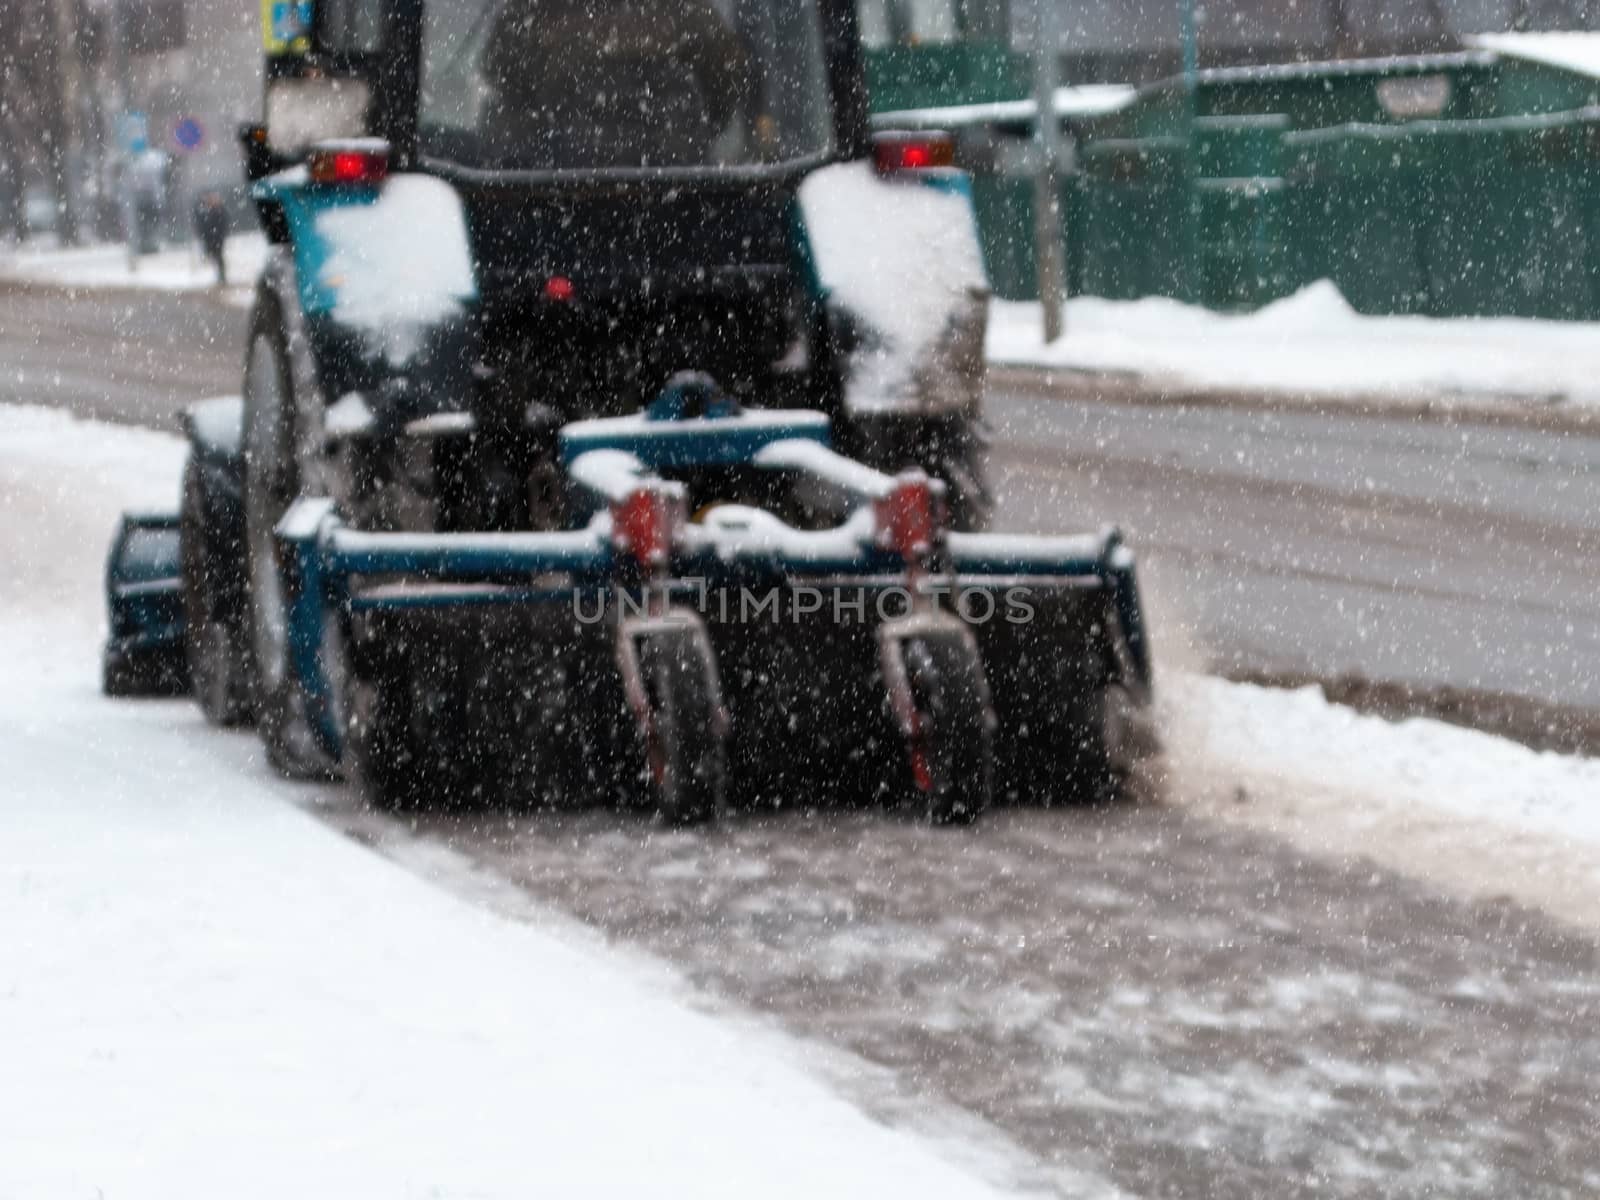 The tractor cleans the pavement from snow in winter with a snow blower and a rotating brush. Municipal services remove snow so as not to slip on the road. Snowing.